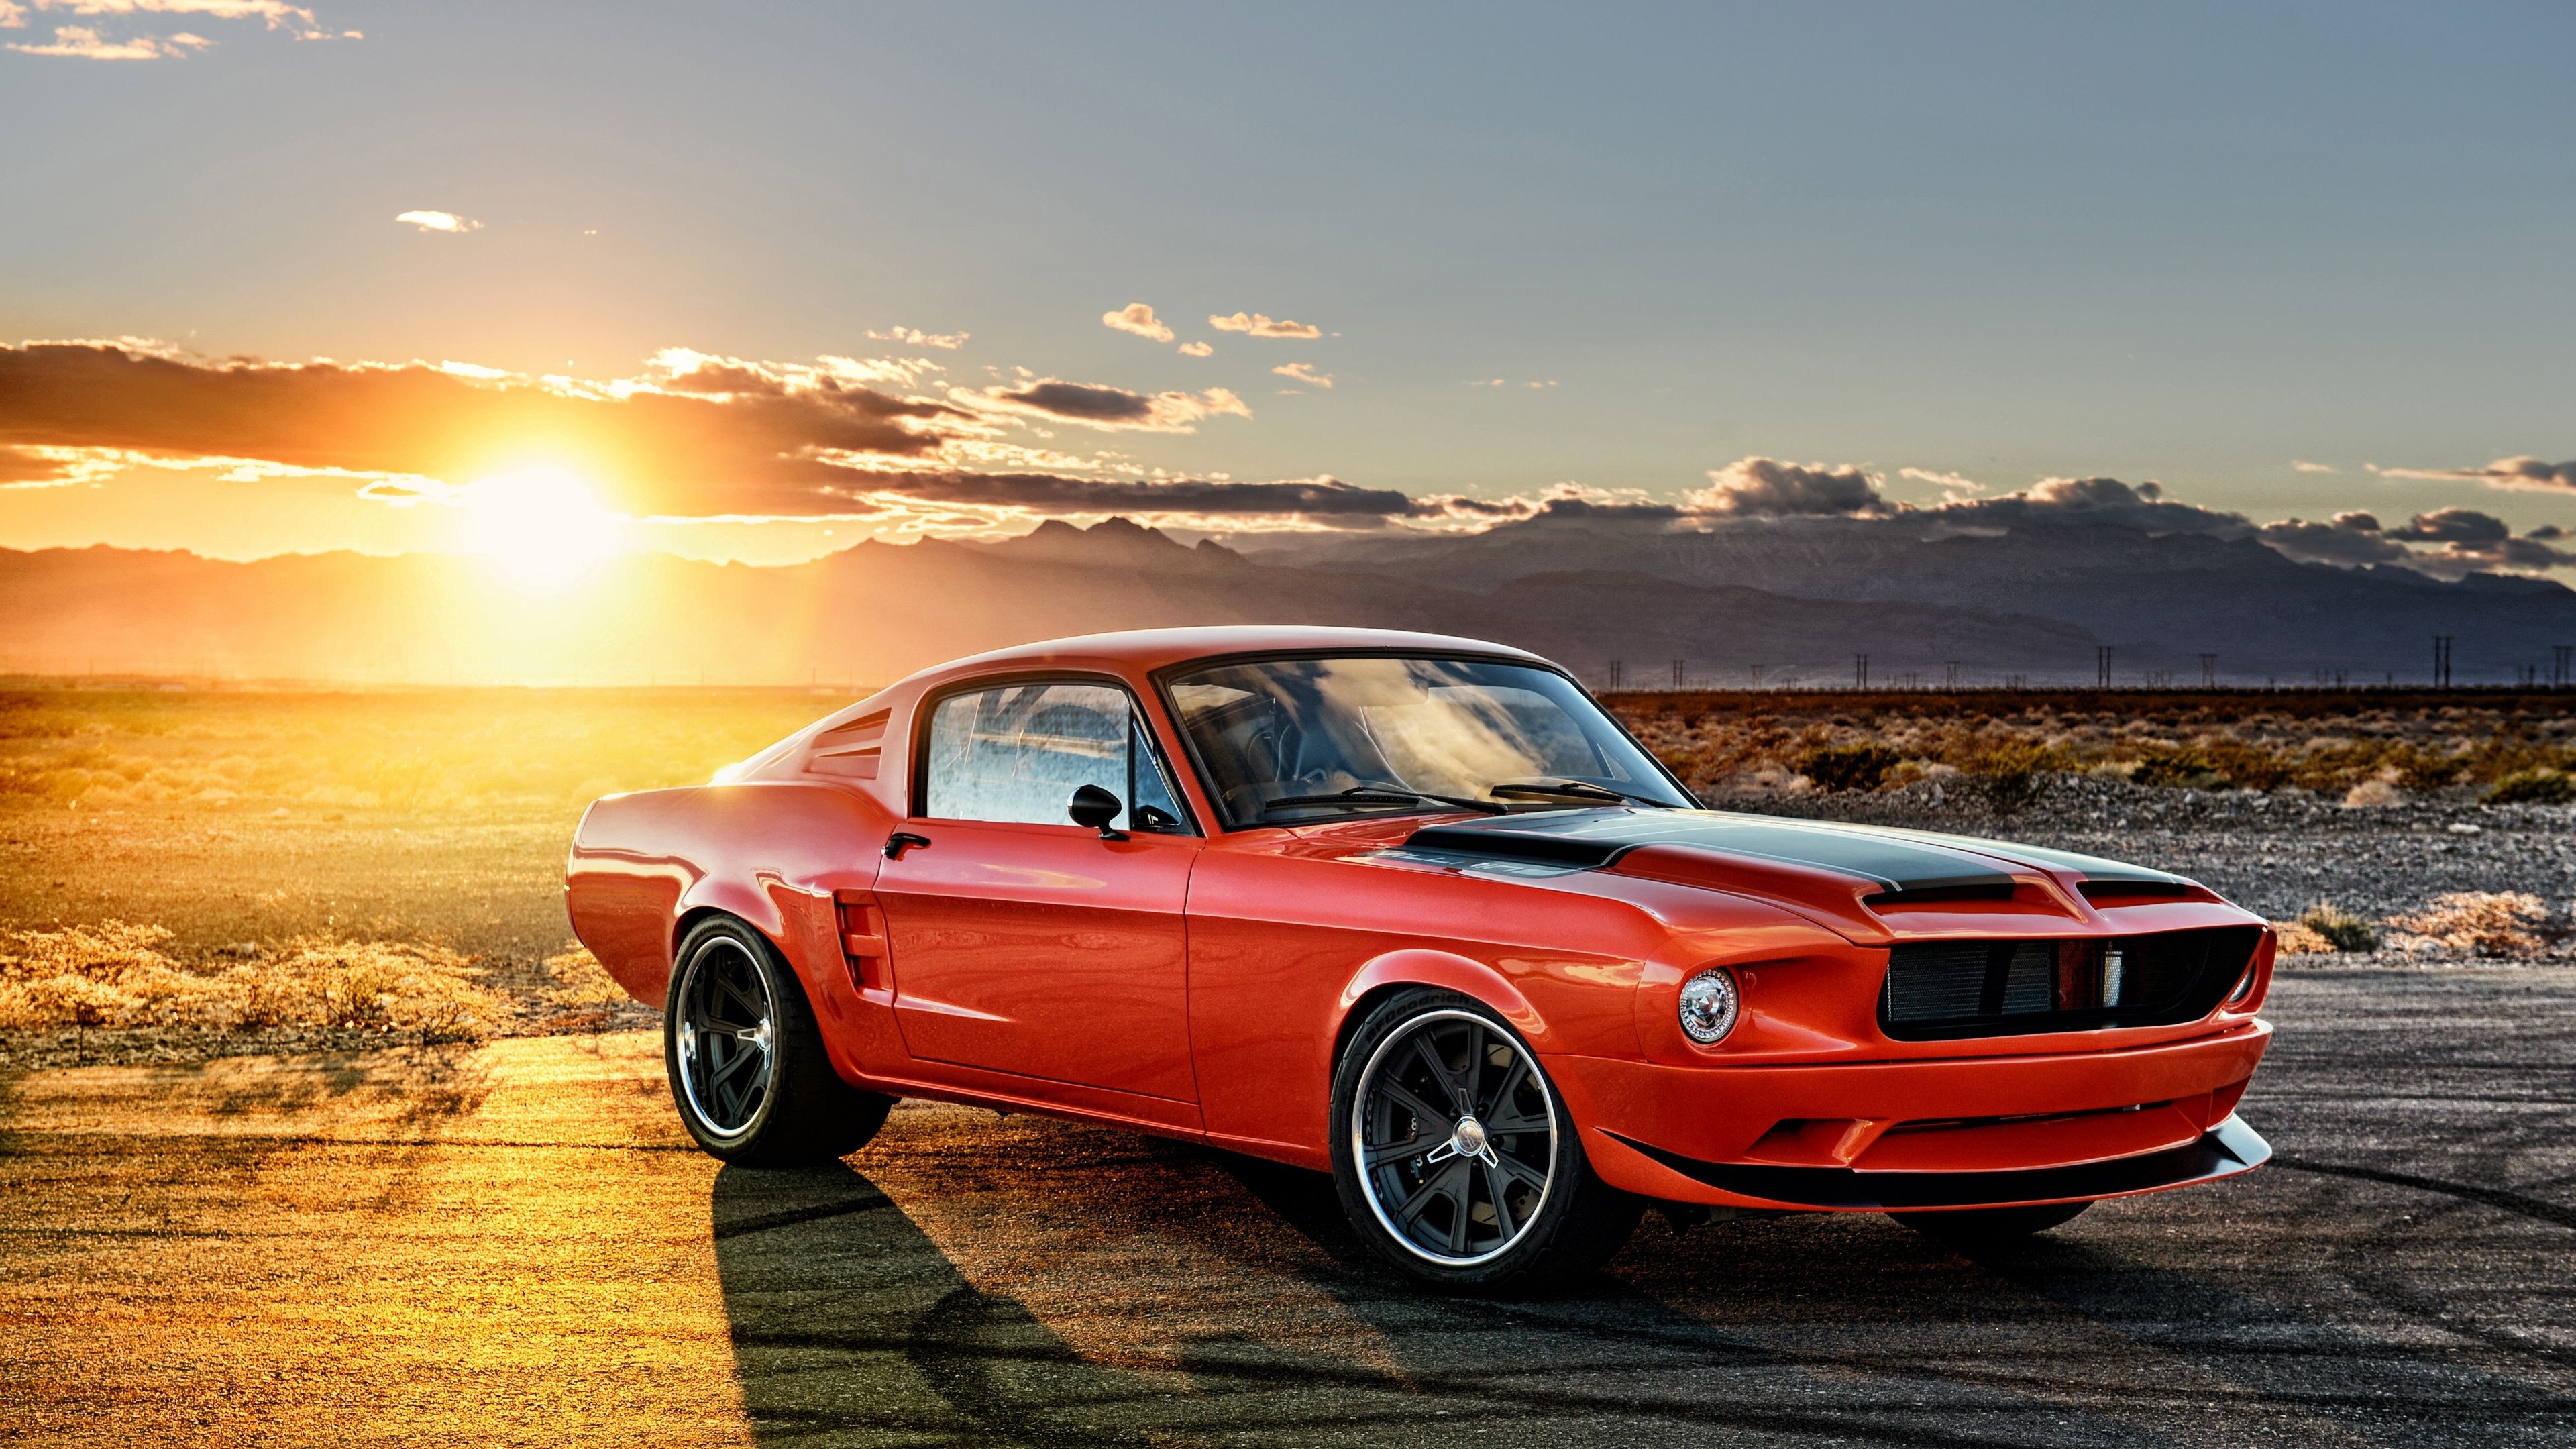 Old Ford Mustang Tuning HD Wallpaper - WallpaperFX